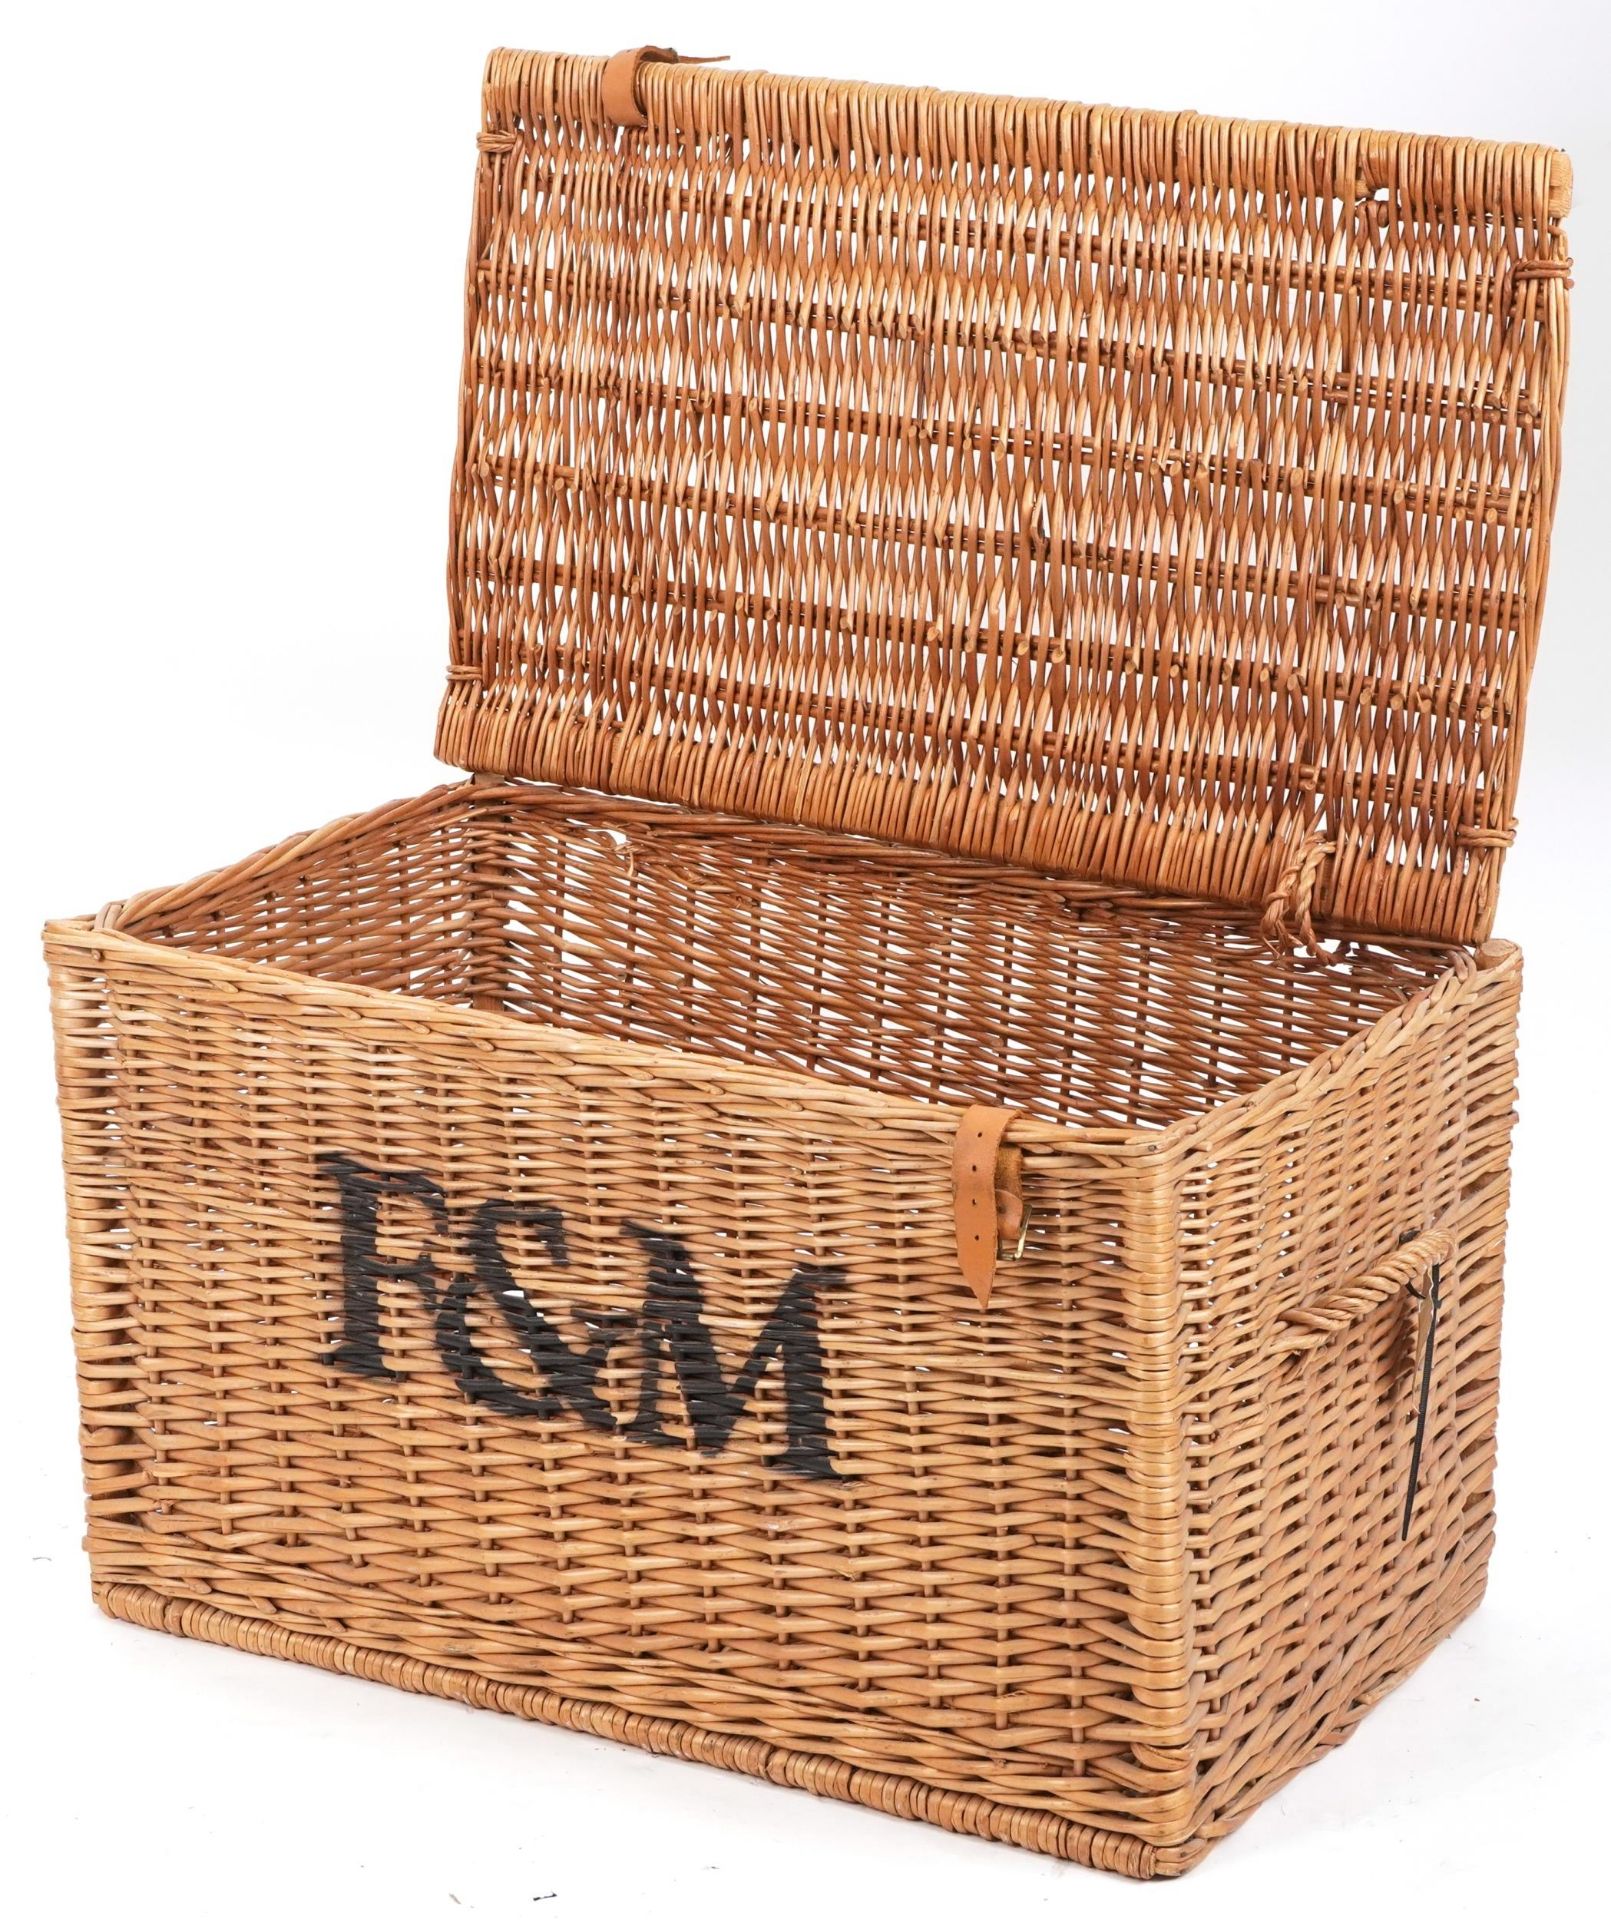 Large Fortnum & Mason wicker hamper, 49cm H x 80cm W x 48cm D : For further information on this - Image 2 of 4